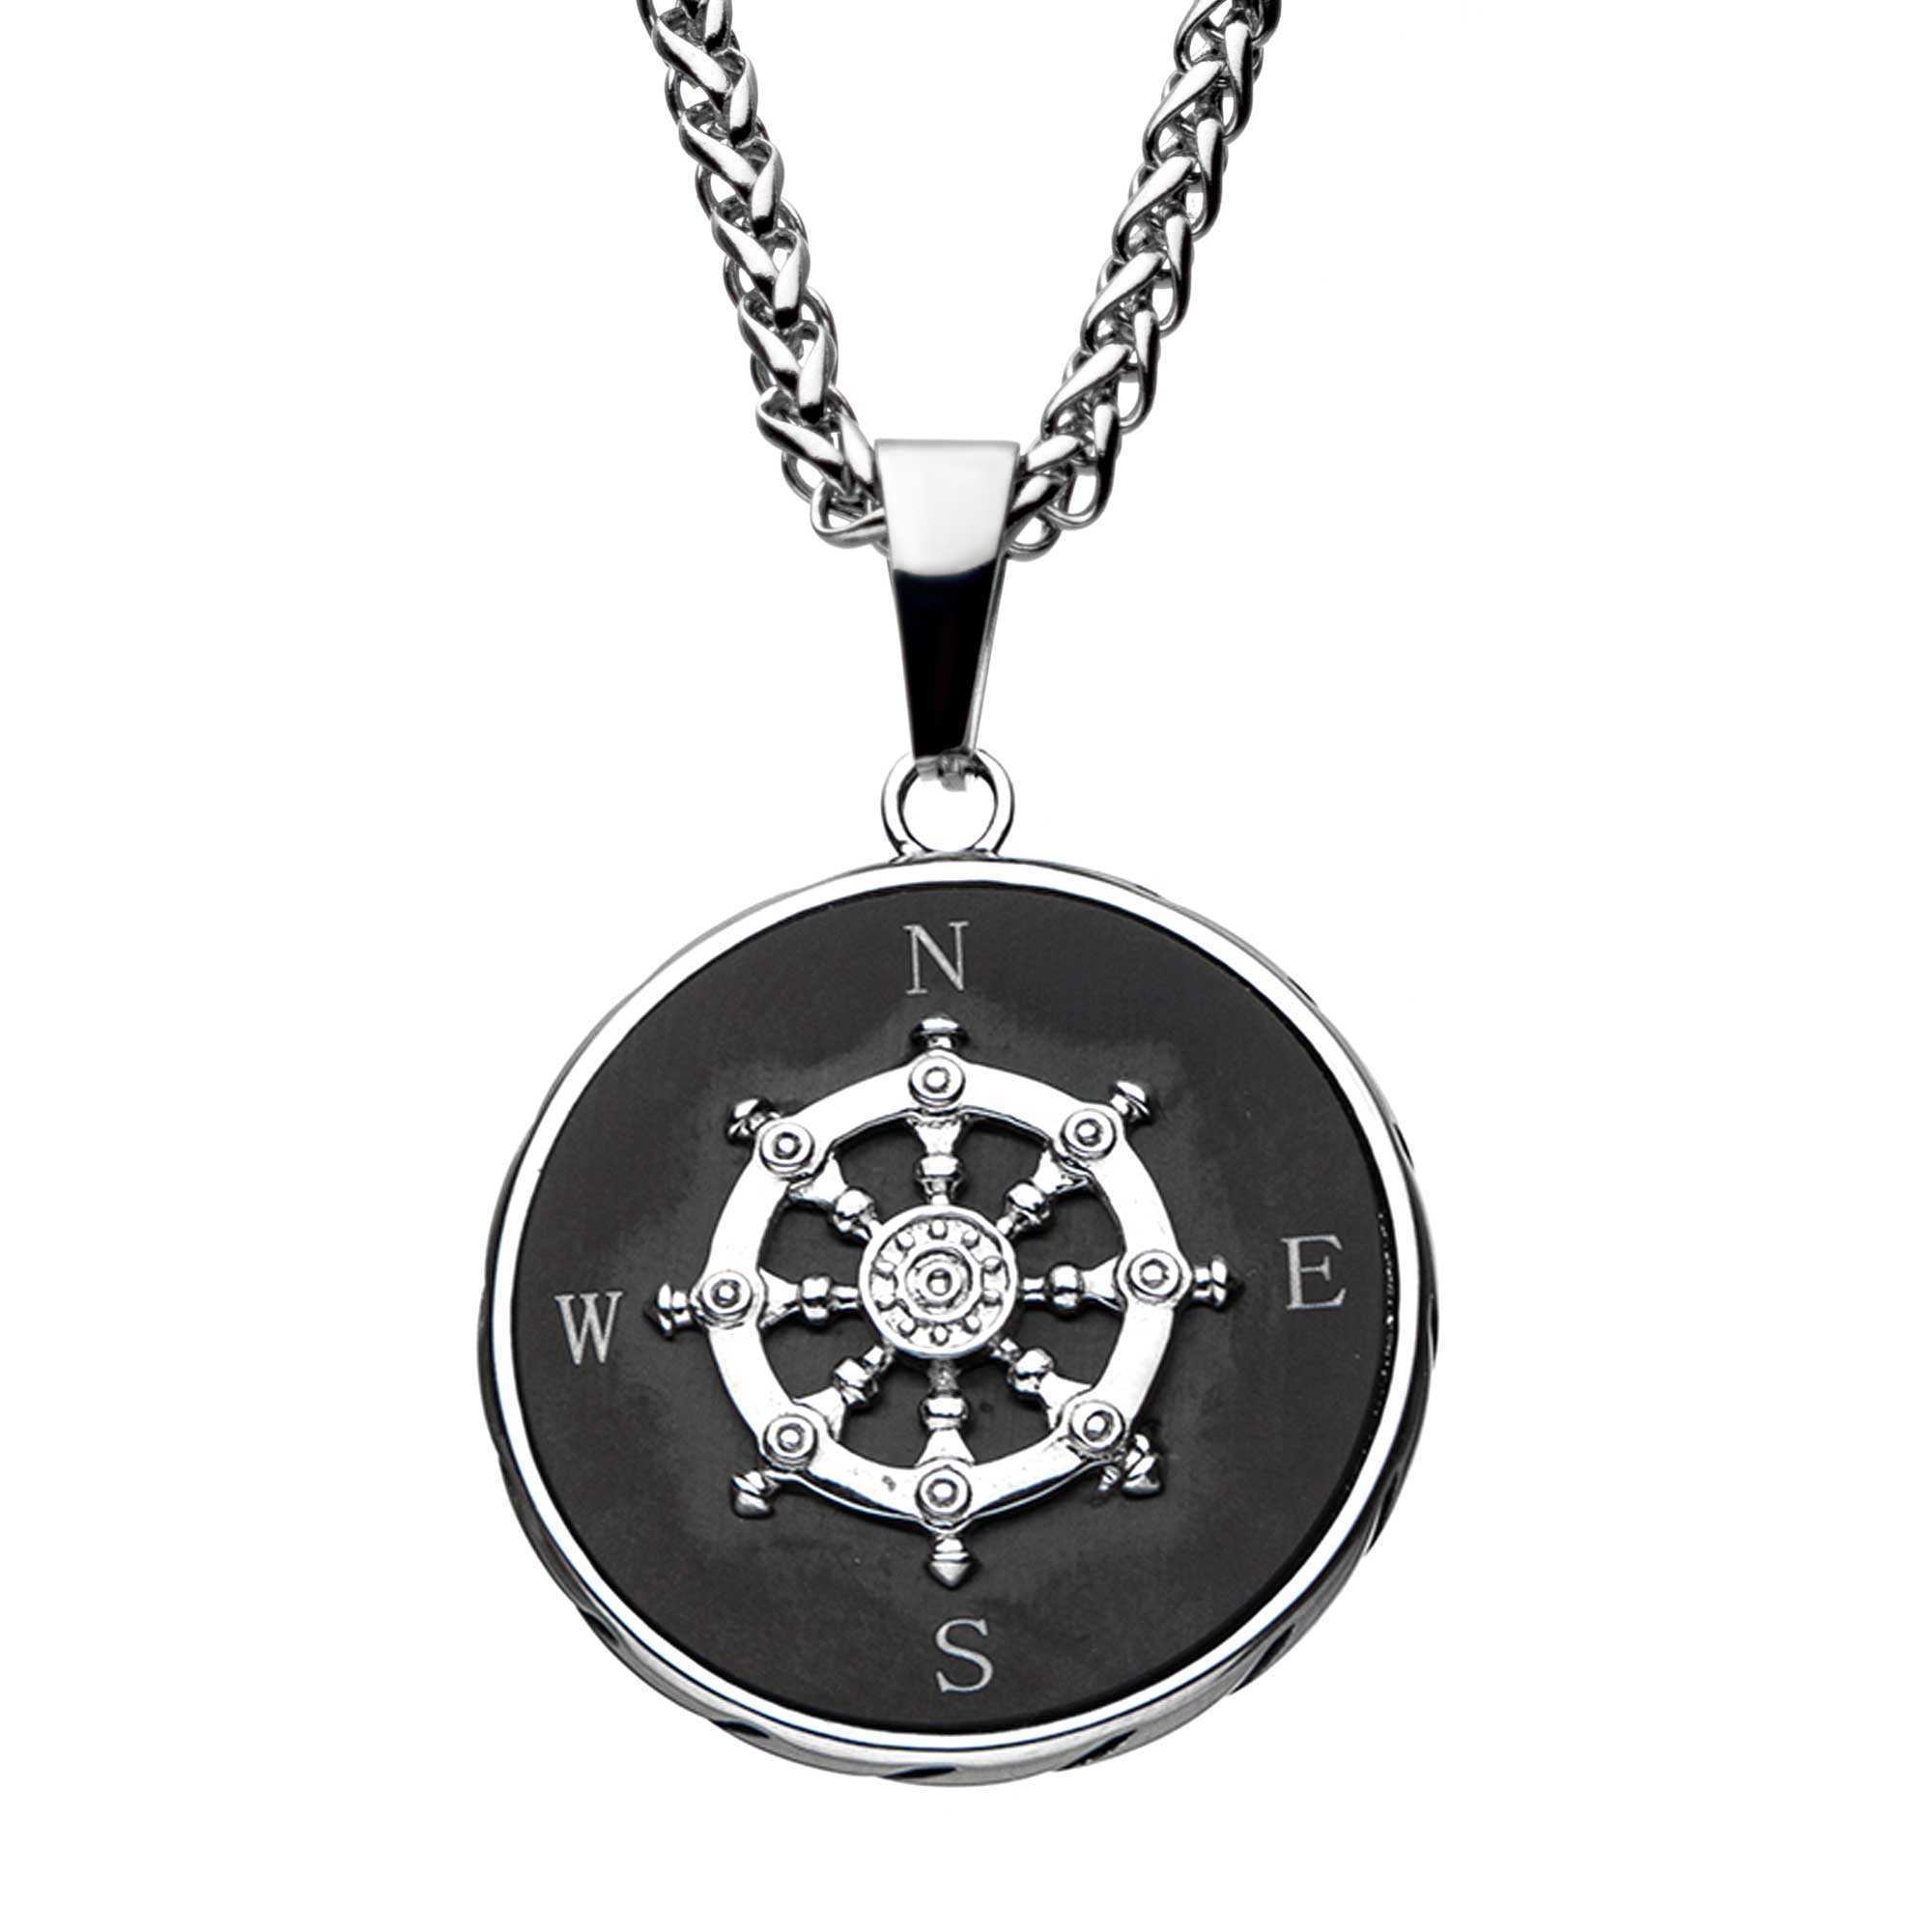 Stainless Steel Black Plated Ship's Wheel Compass Pendant with Chain Milano Jewelers Pembroke Pines, FL